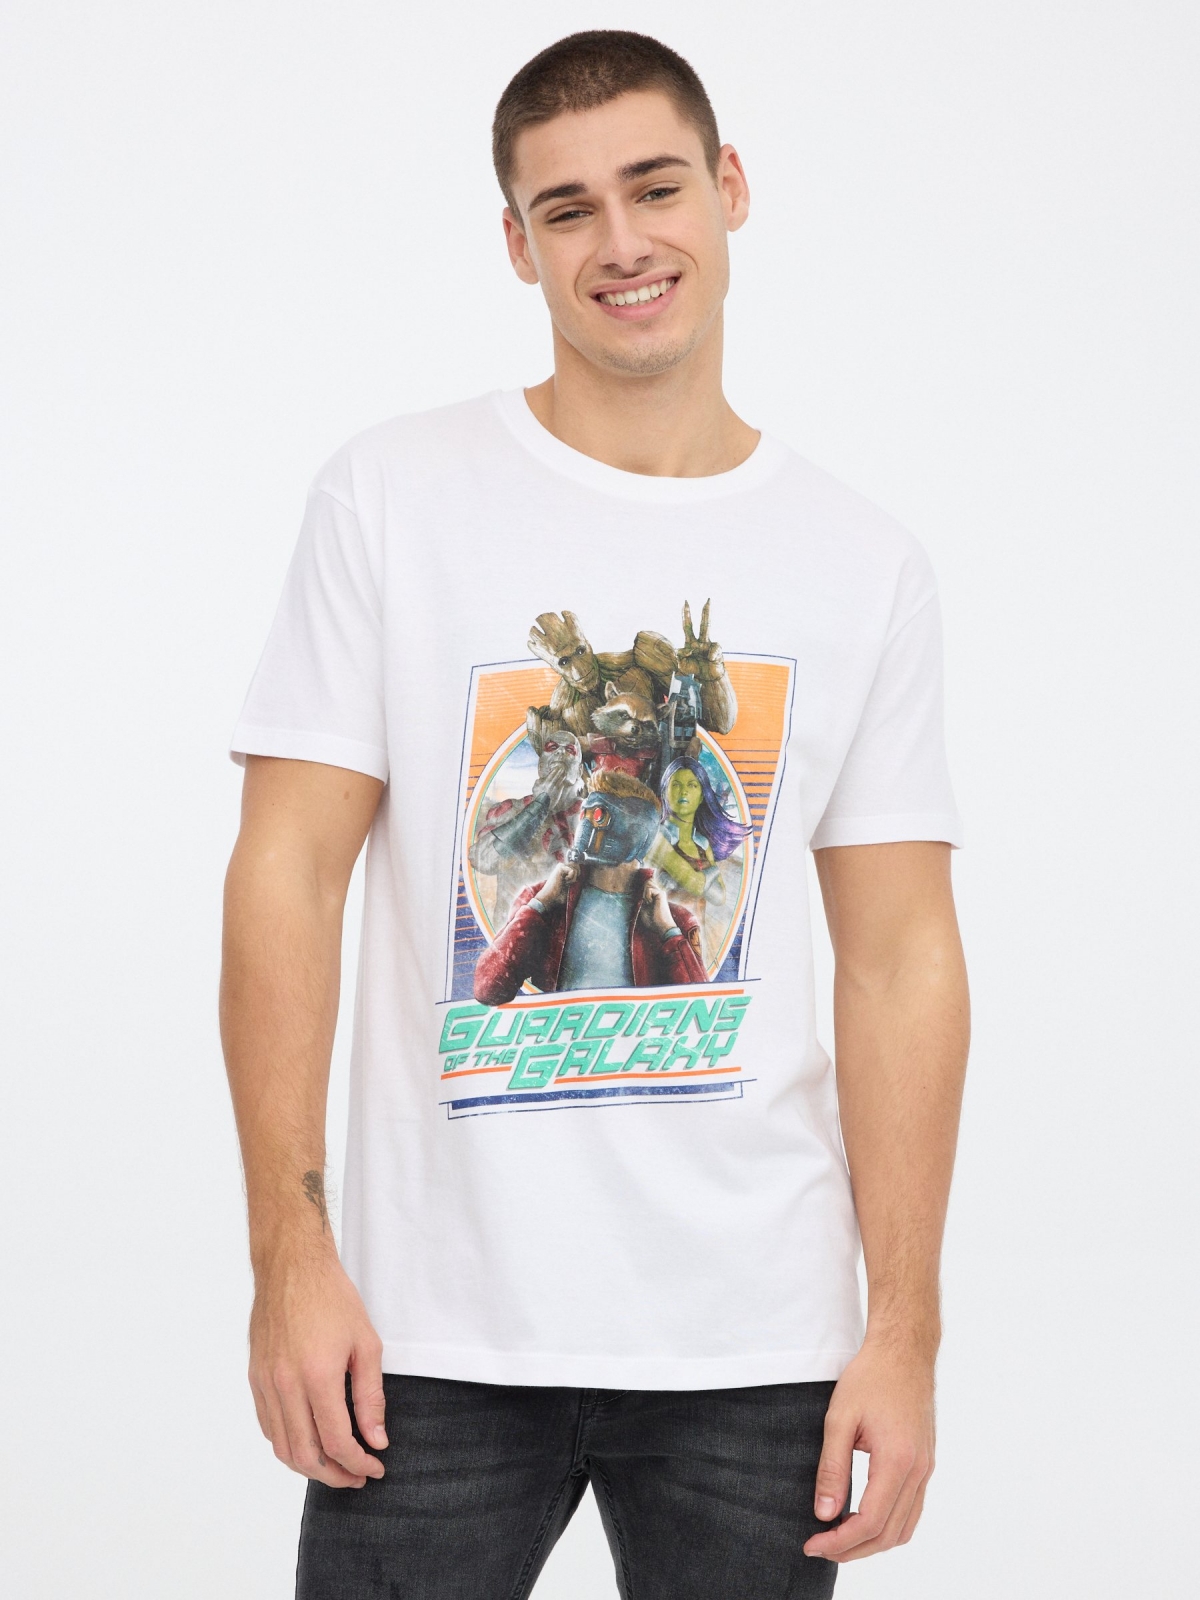 Guardians of the Galaxy t-shirt white middle front view